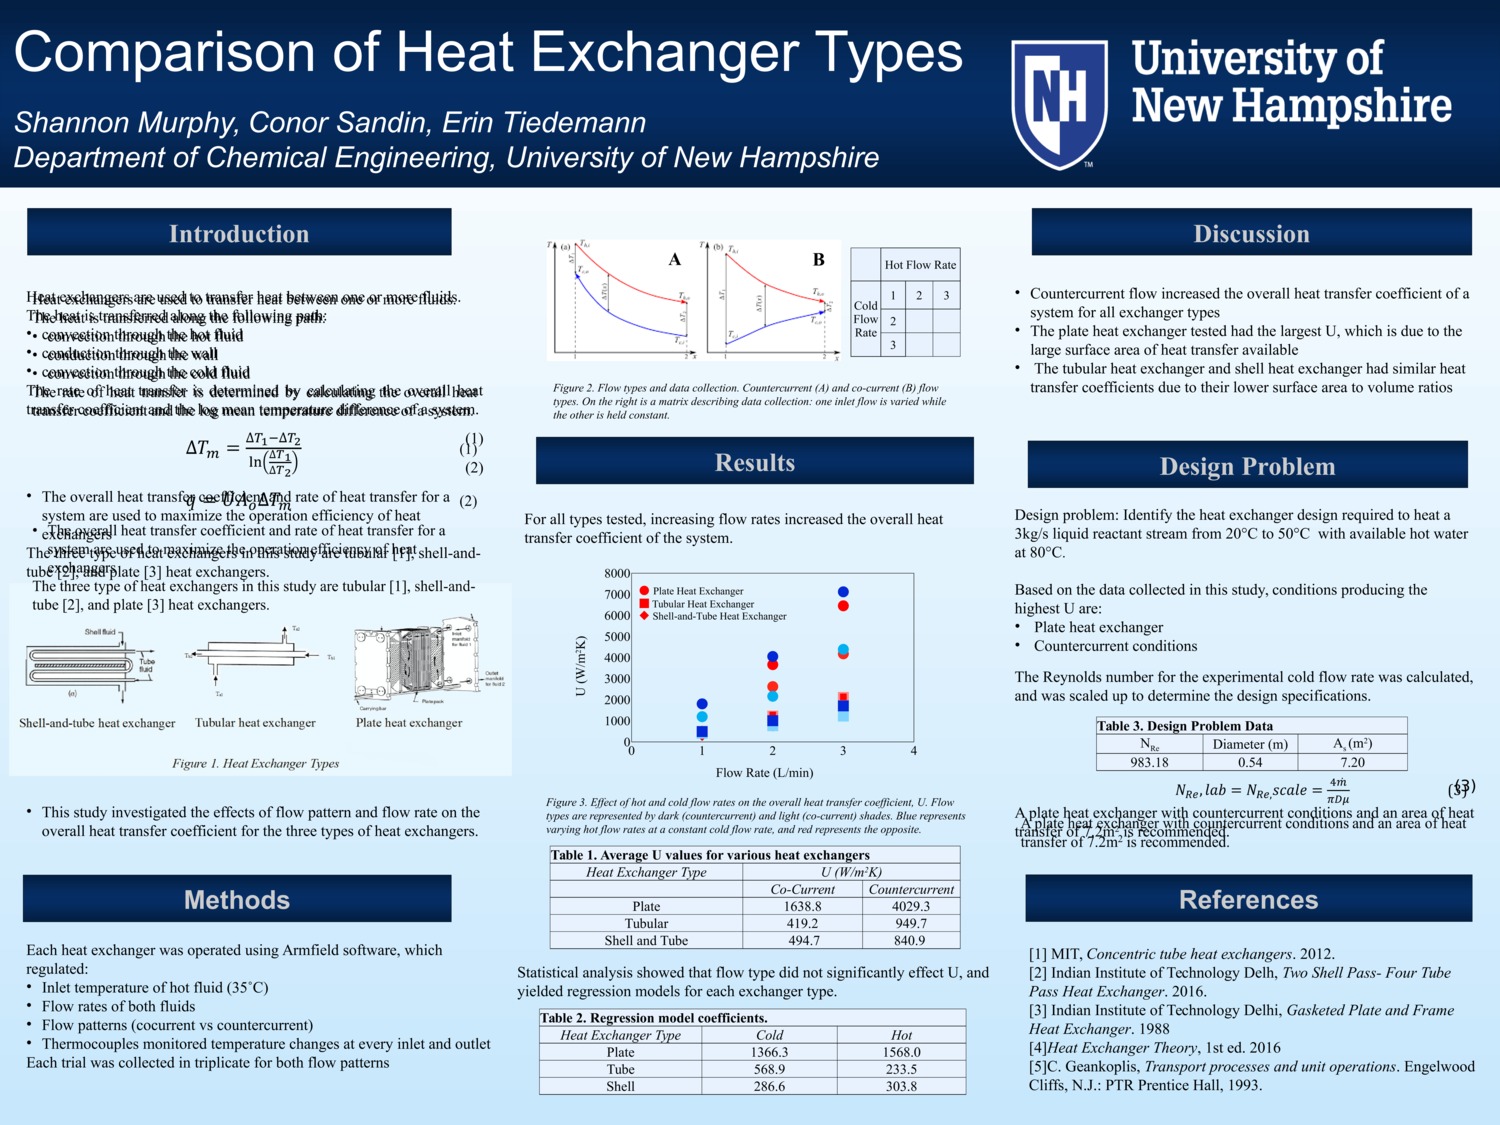 Comparisons Of Heat Exchangers by conorsandin